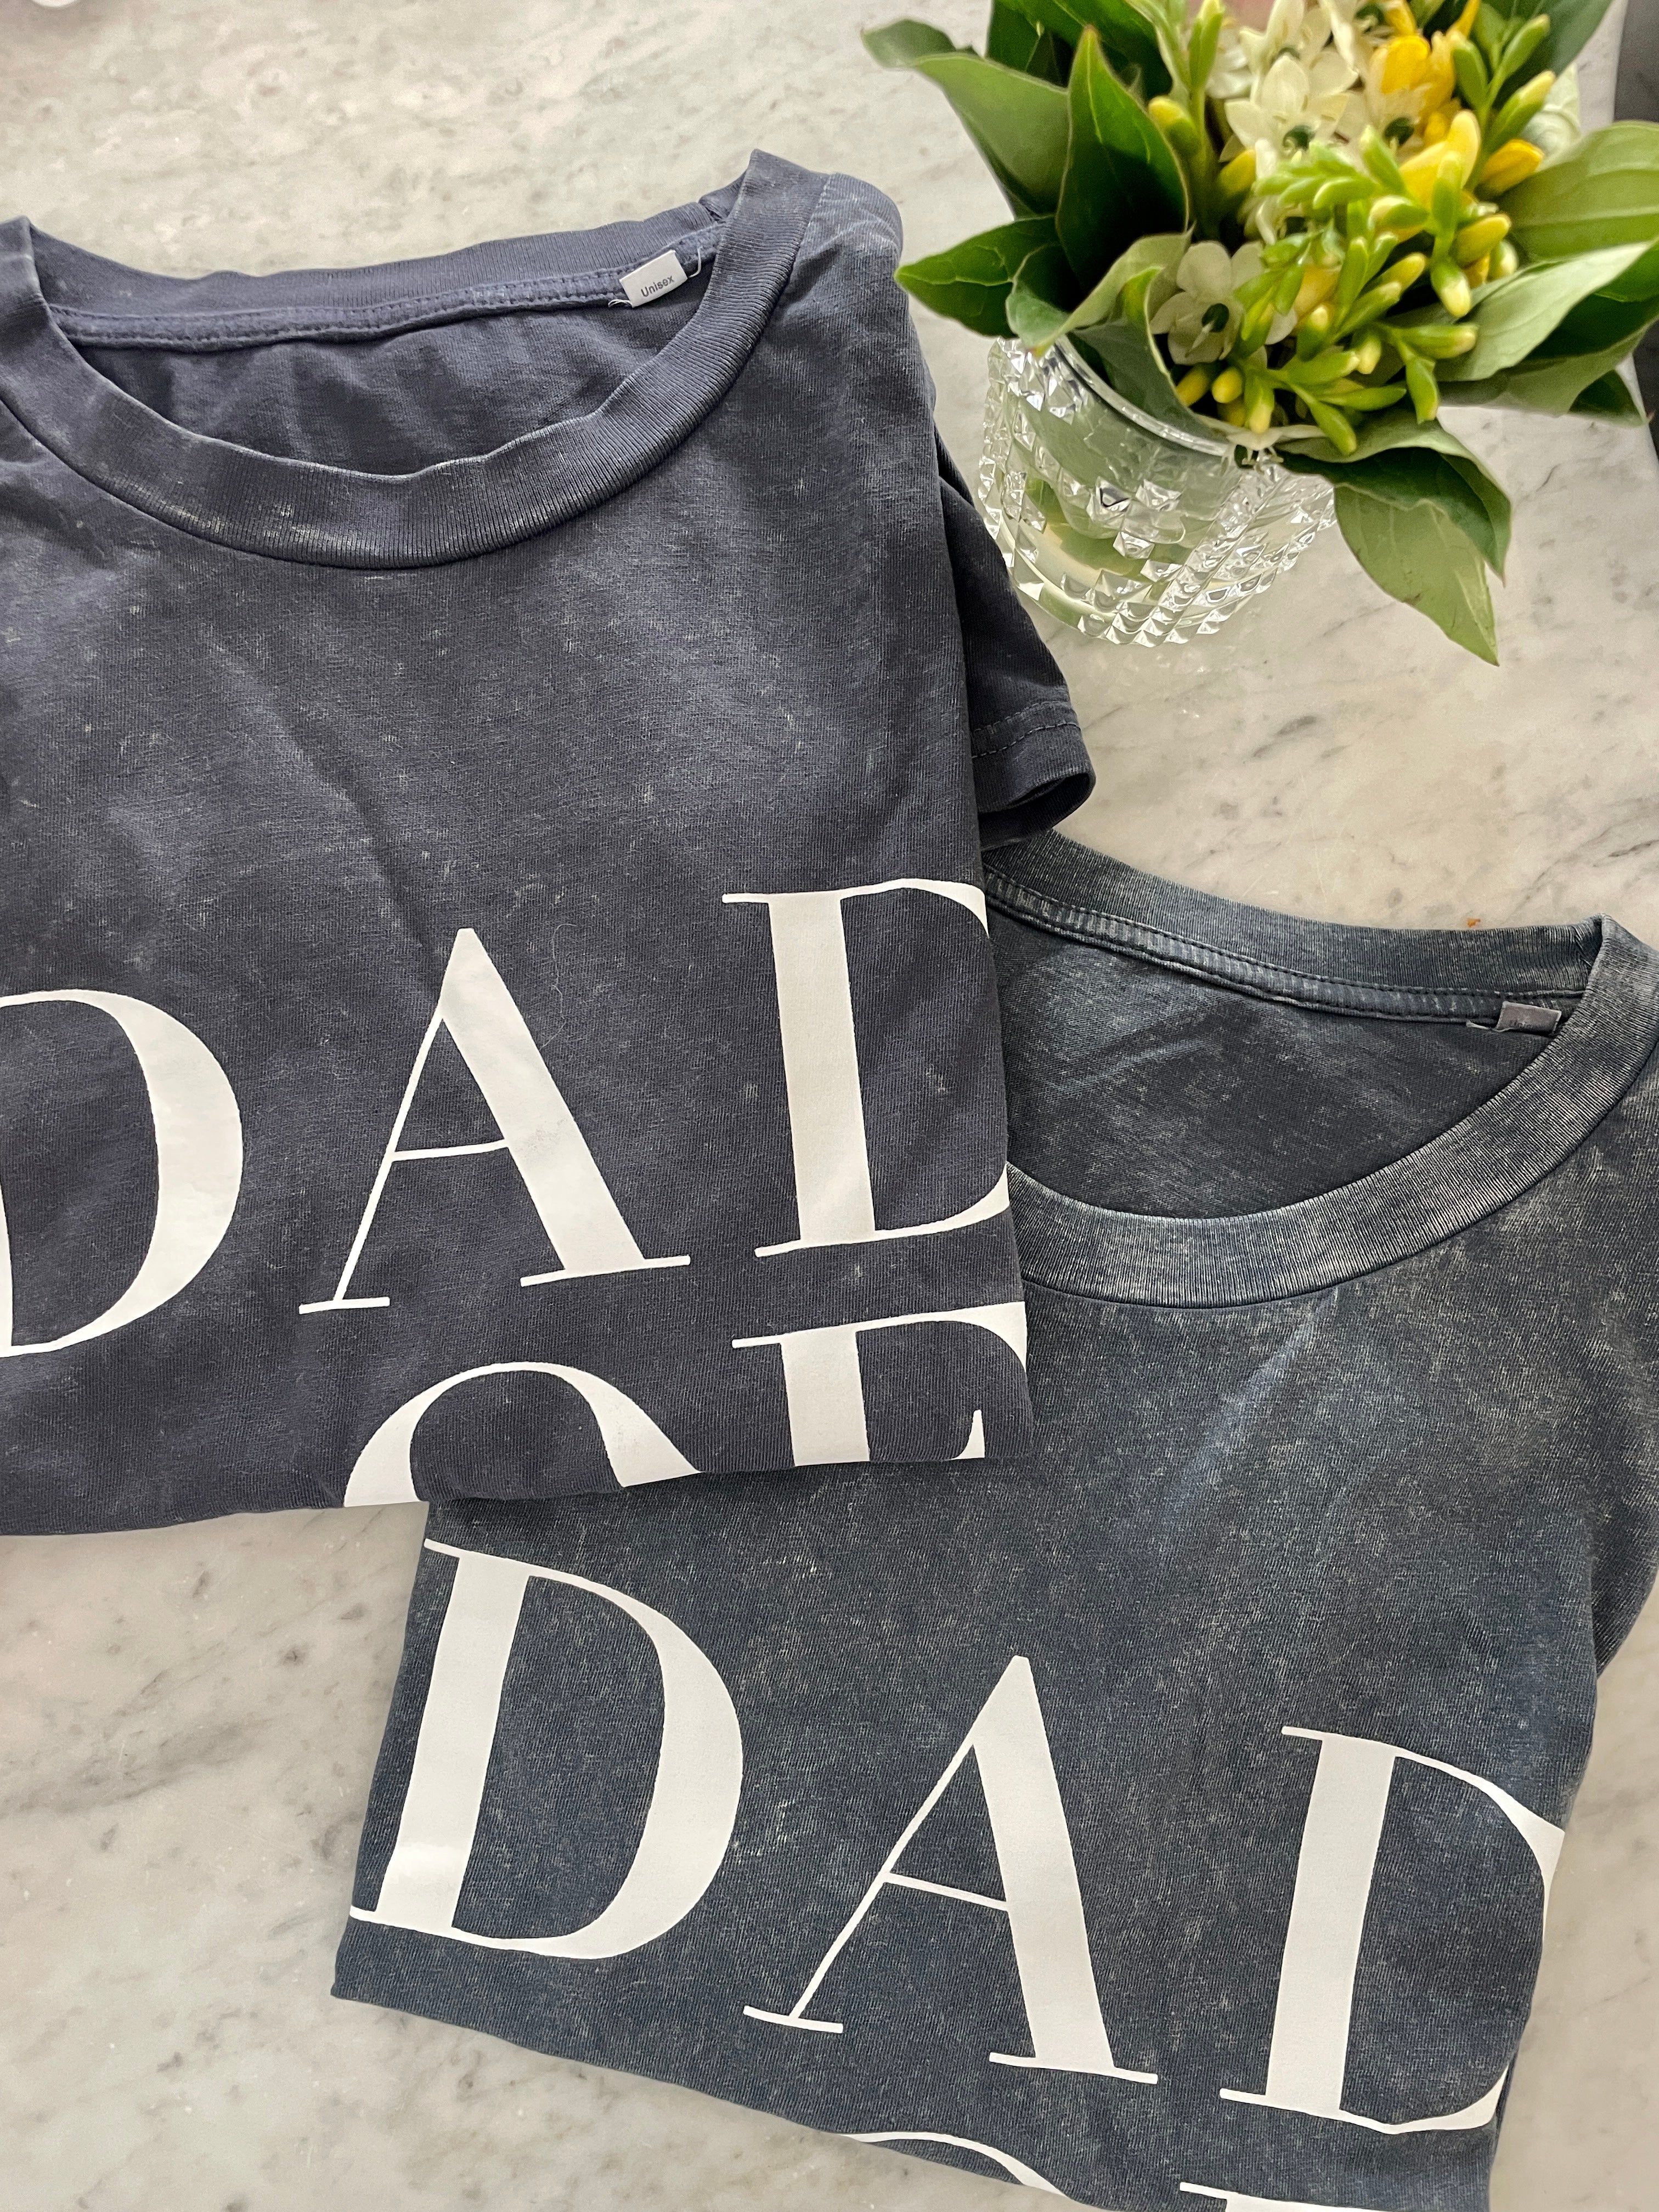 A T Shirt gris anthracite vintage DAD OF TWO